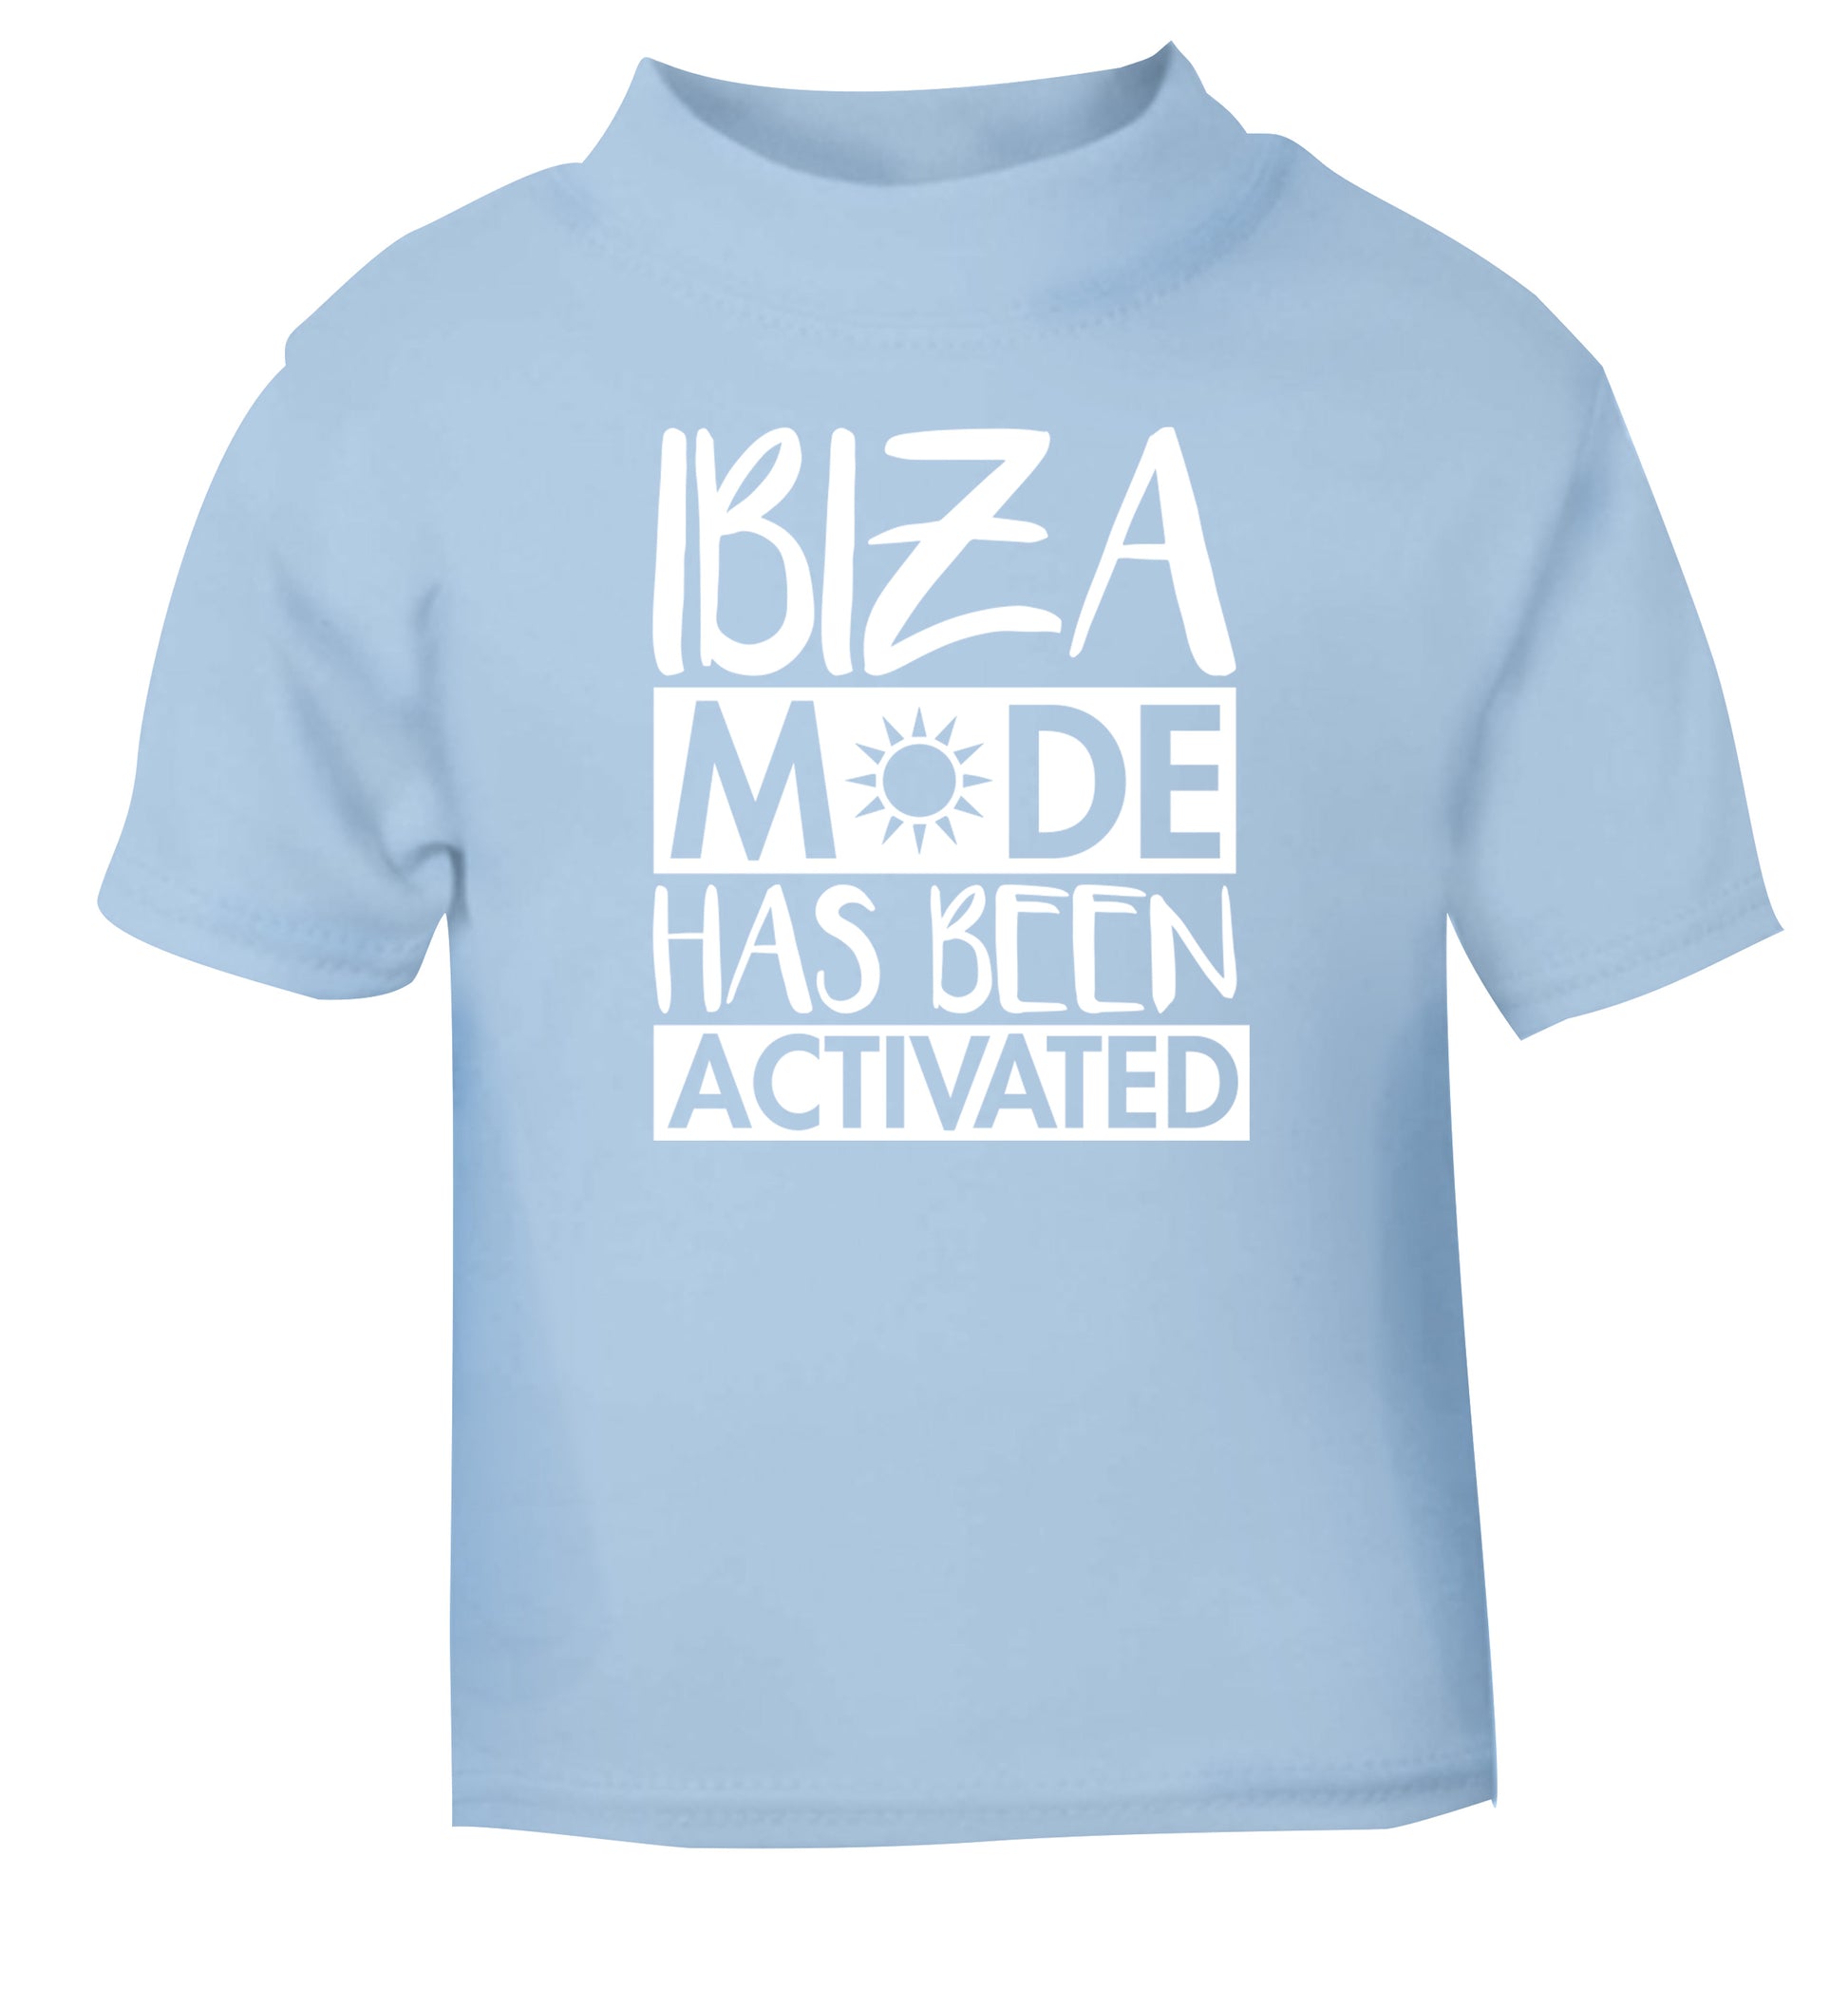 Ibiza mode has been activated light blue Baby Toddler Tshirt 2 Years